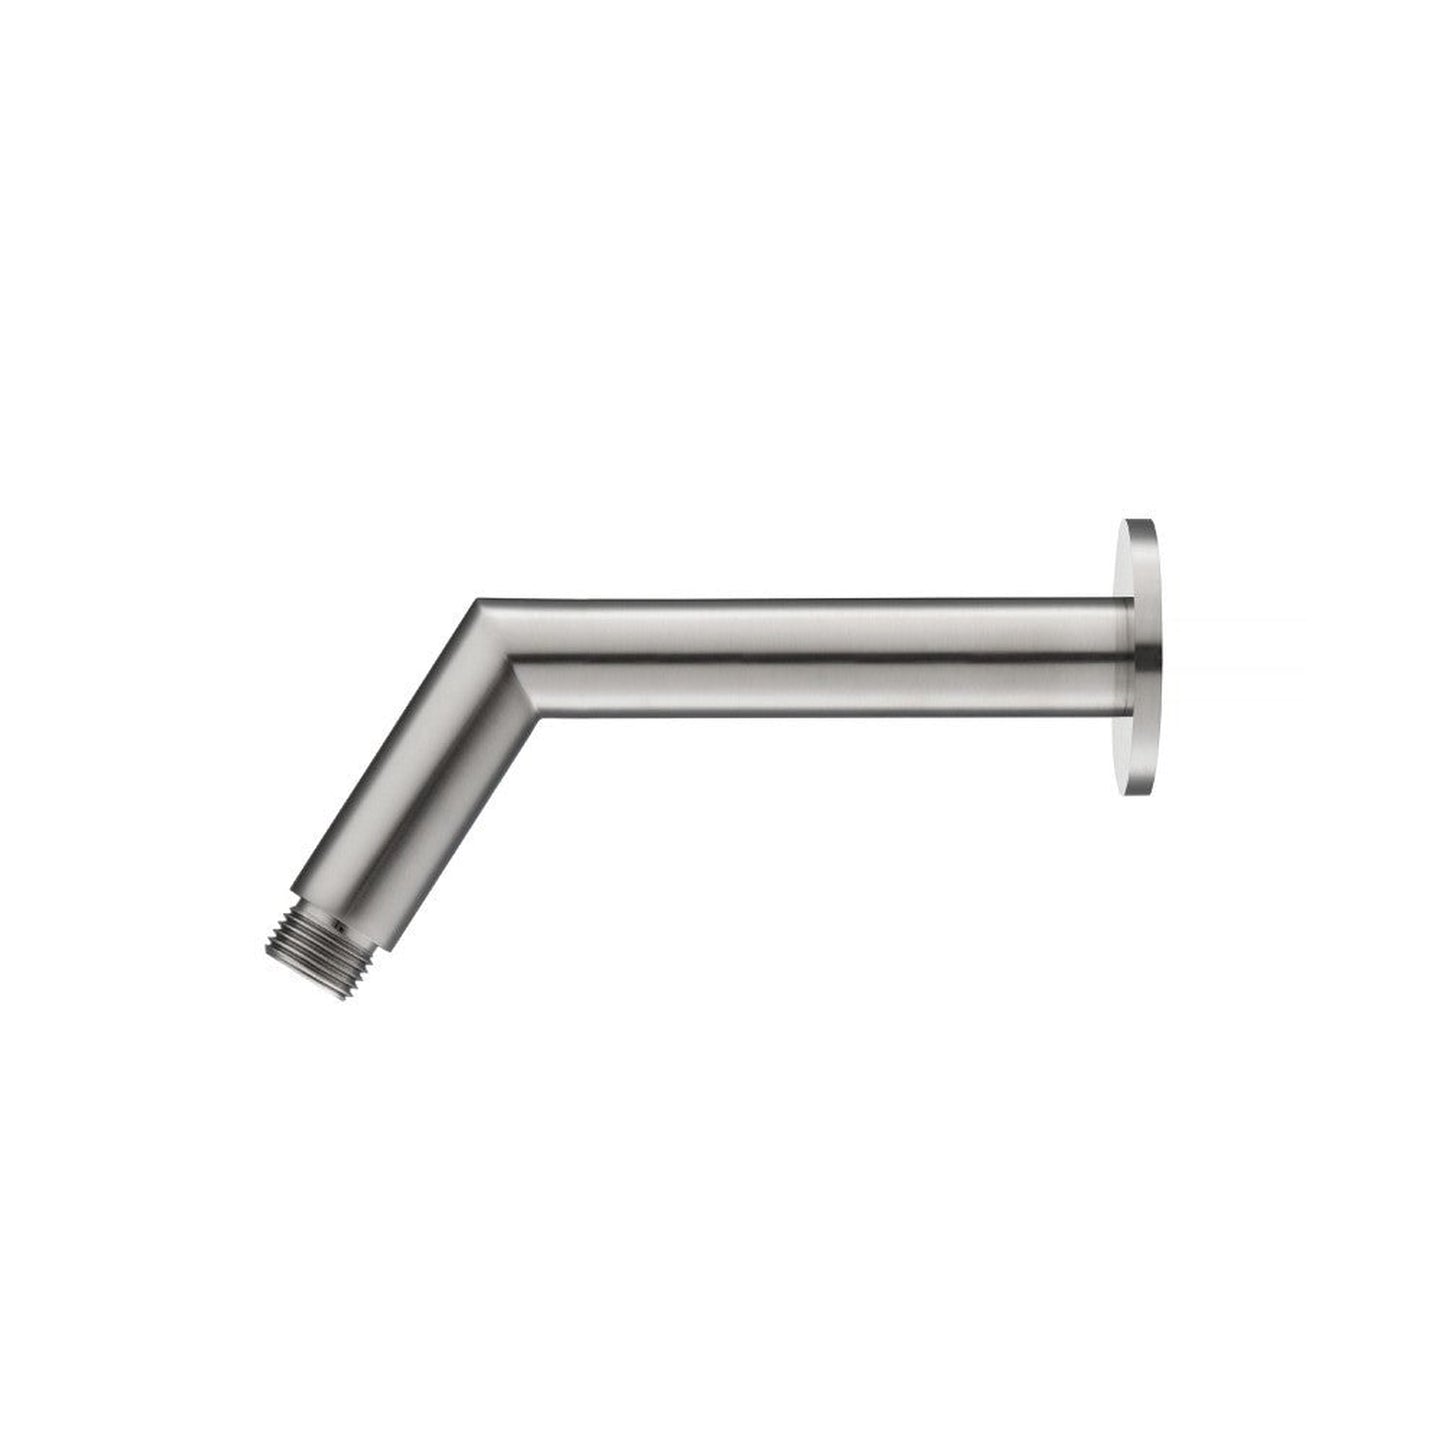 Isenberg Universal Fixtures 6" Brushed Nickel PVD Solid Brass Wall-Mounted Standard Shower Arm With Square Sliding Flange